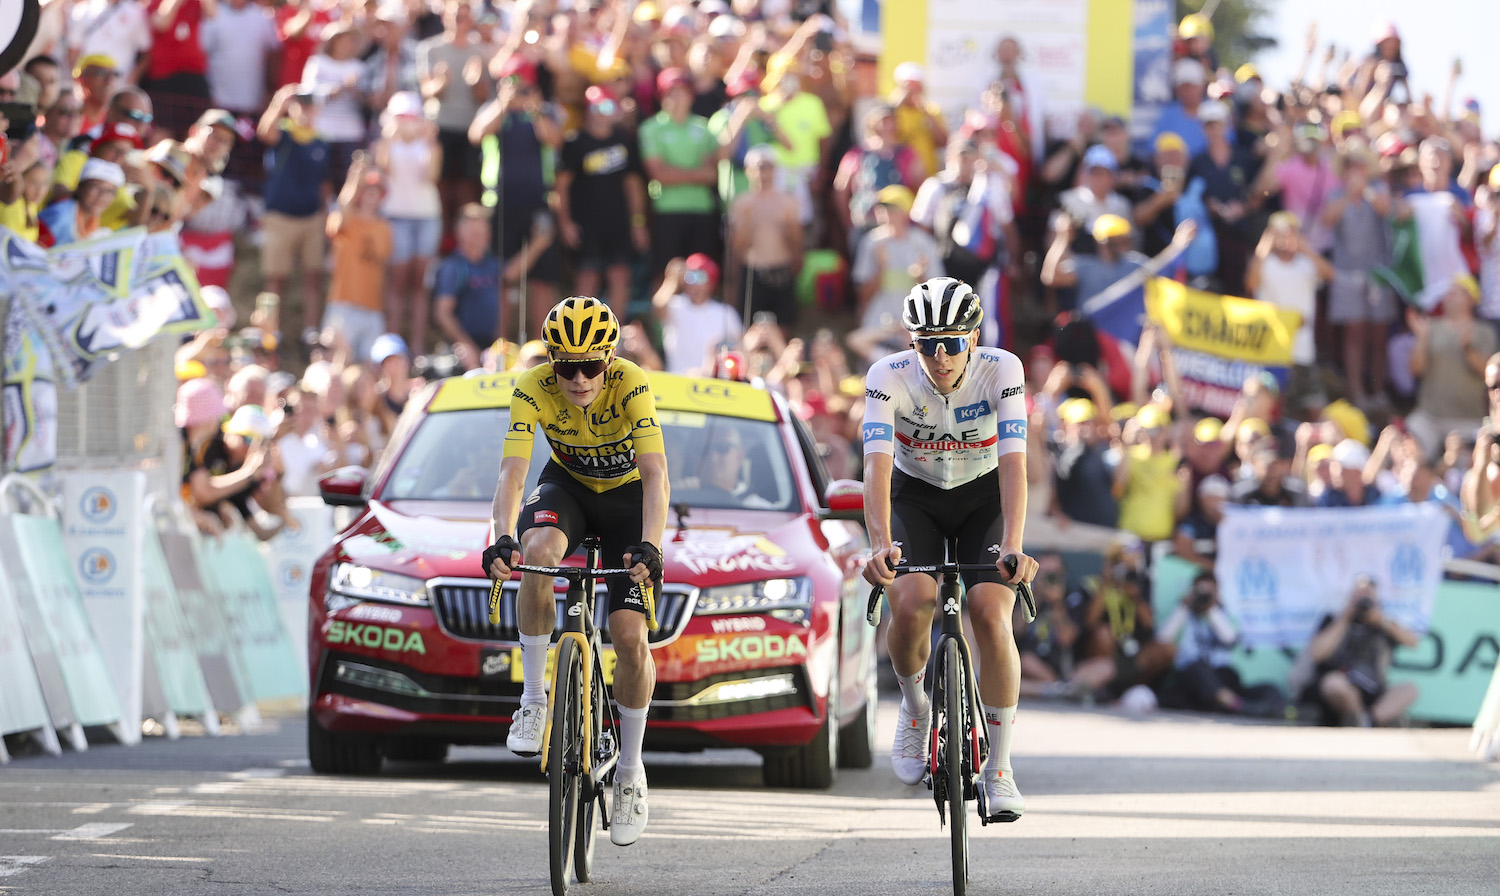 SAINT-GERVAIS MONT-BLANC, FRANCE - JULY 16: Yellow jersey, race leader Jonas Vingegaard of Denmark and Jumbo - Visma and White jersey of best young rider Tadej Pogacar of Slovenia and UAE Team Emirates cross the finish line of stage fifteen of the 110th Tour de France 2023, a 179km stage from Les Gets les Portes du Soleil to Saint-Gervais Mont-Blanc 1379m / #UCIWT / on July 16, 2023 in Saint-Gervais Mont-Blanc, France. (Photo by Jean Catuffe/Getty Images)